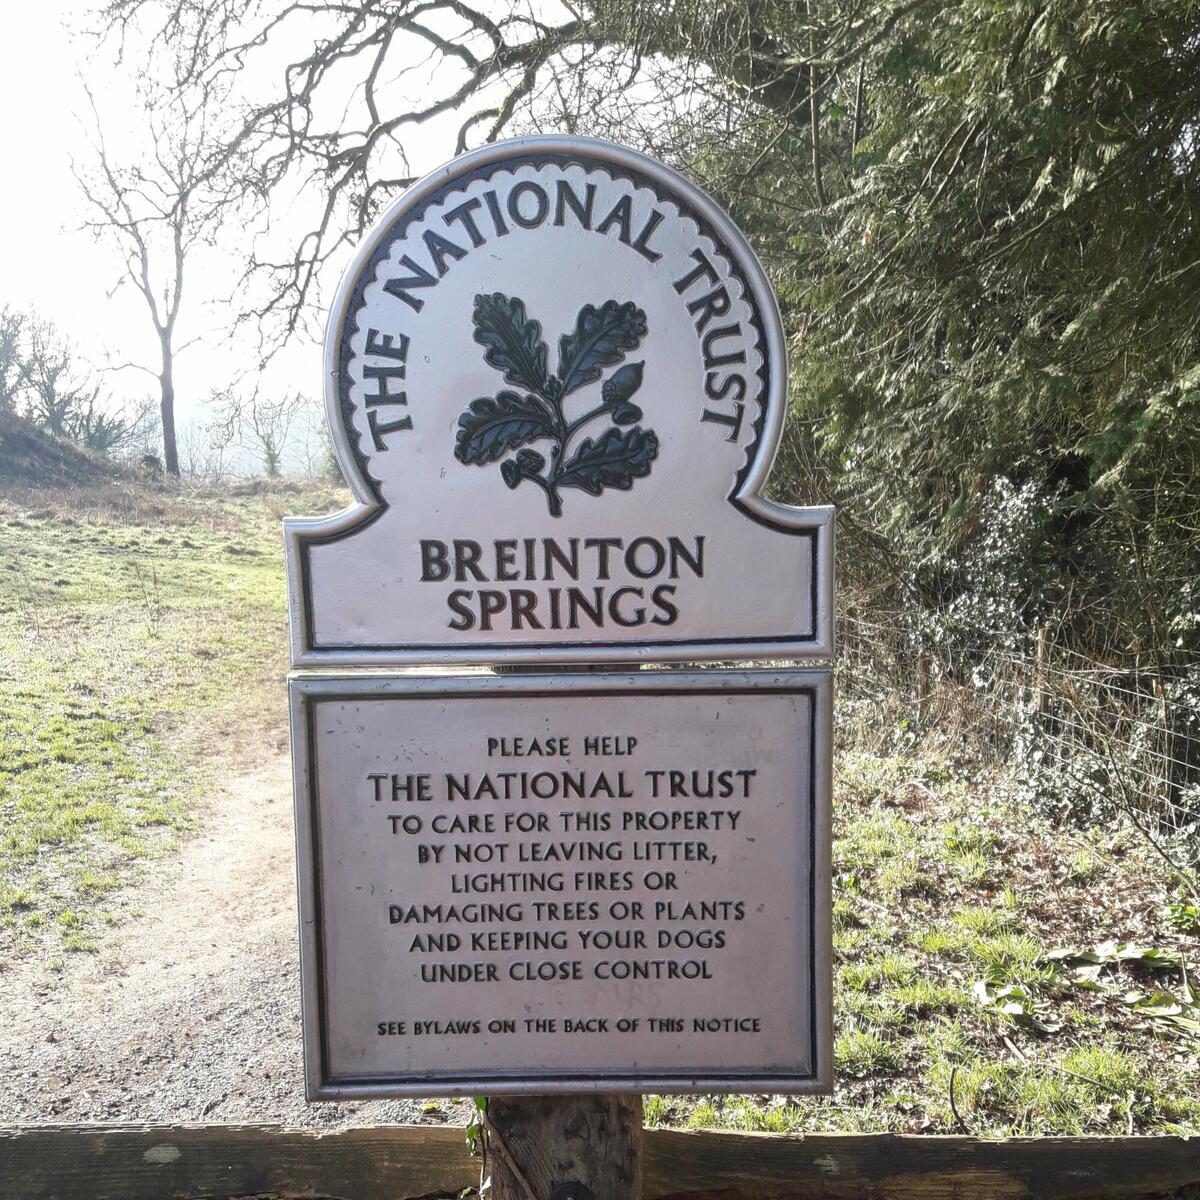 Breinton Springs is cared for by the National Trust.